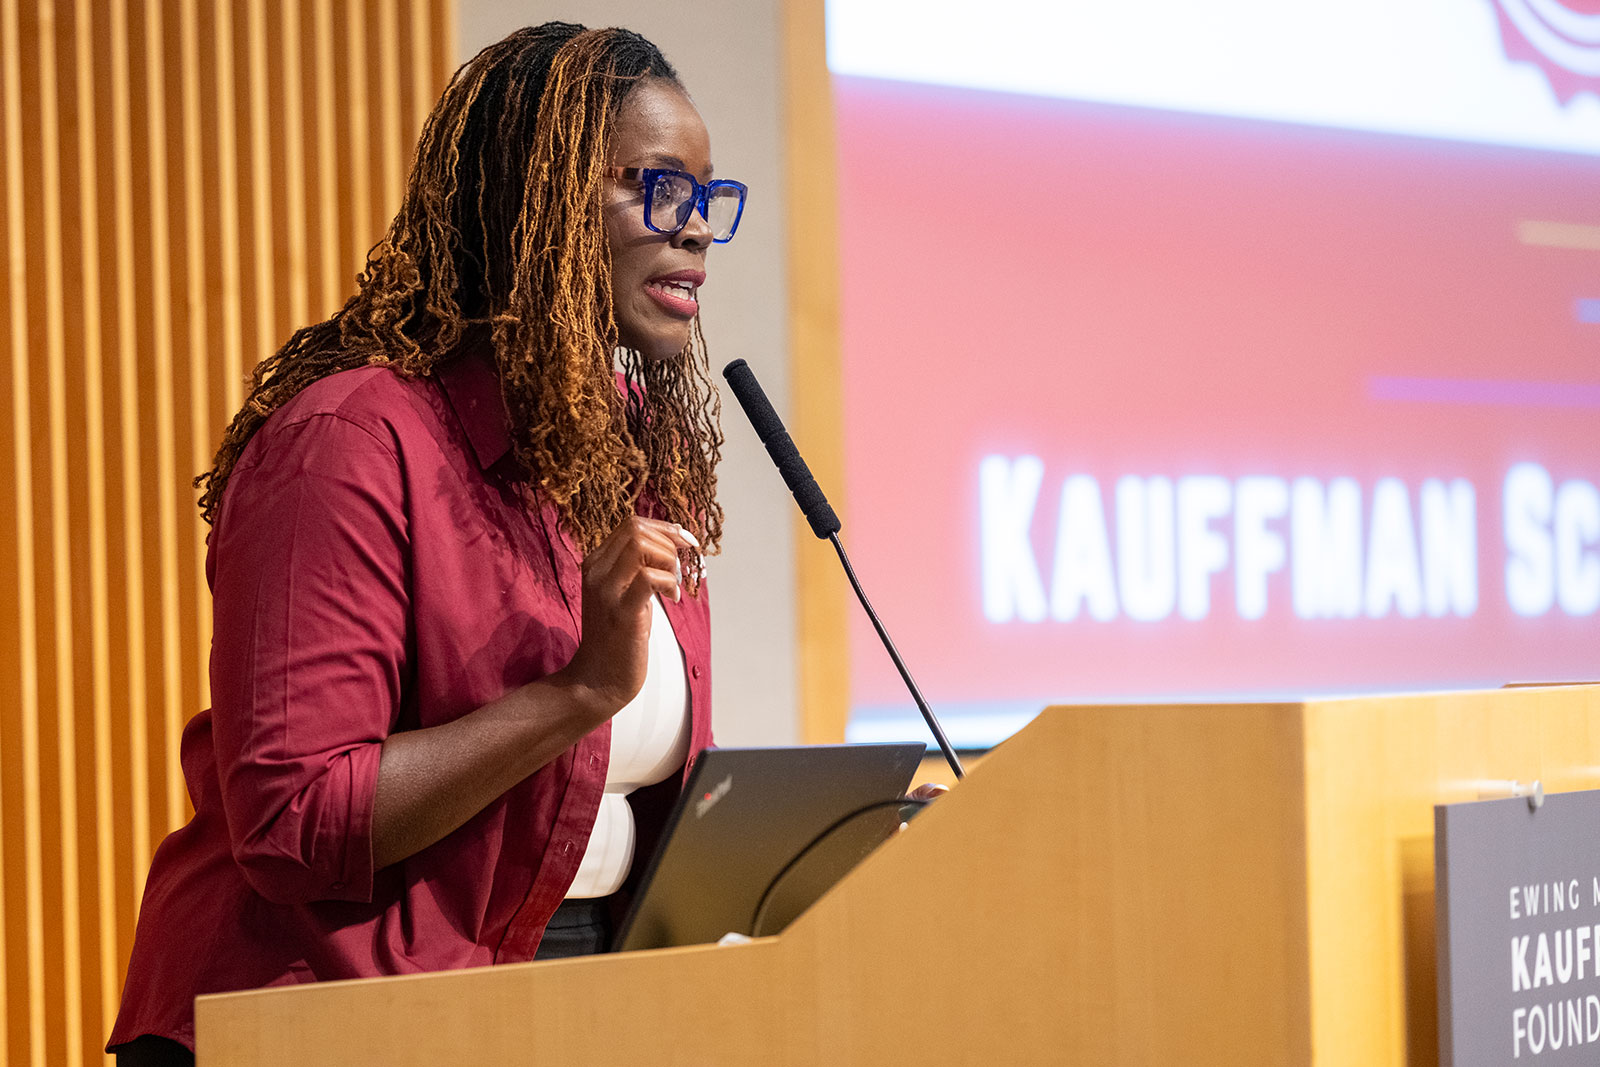 Tanesha Ford, executive director of Kauffman Scholars, speaks at the ribbon-cutting ceremony.